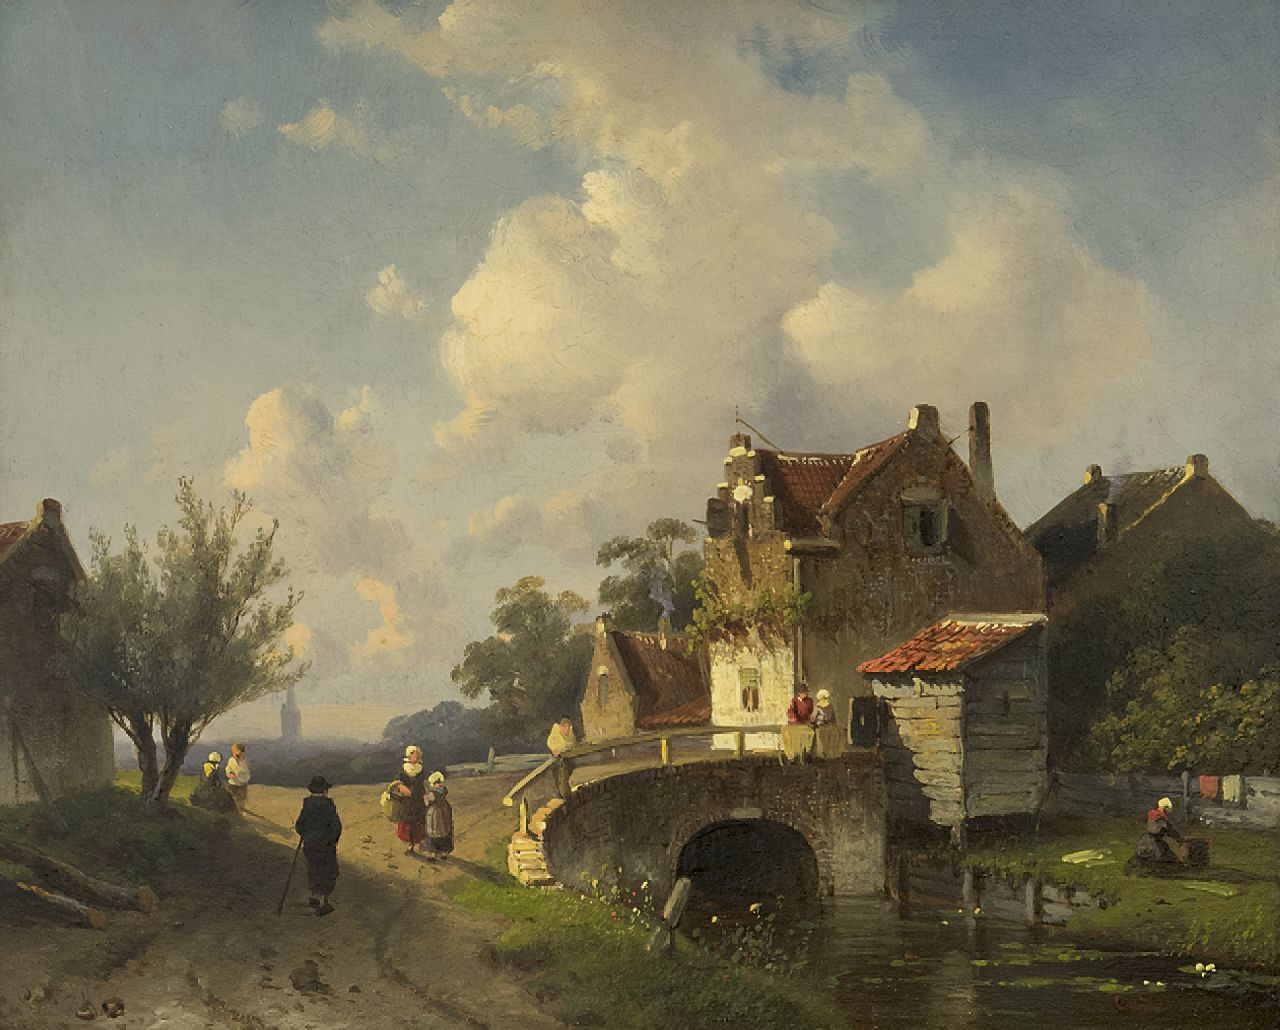 Leickert C.H.J.  | 'Charles' Henri Joseph Leickert, Houses in a river landscape, oil on panel 20.0 x 24.7 cm, signed signed twice (l.l. and l.r.) and painted ca. 1860